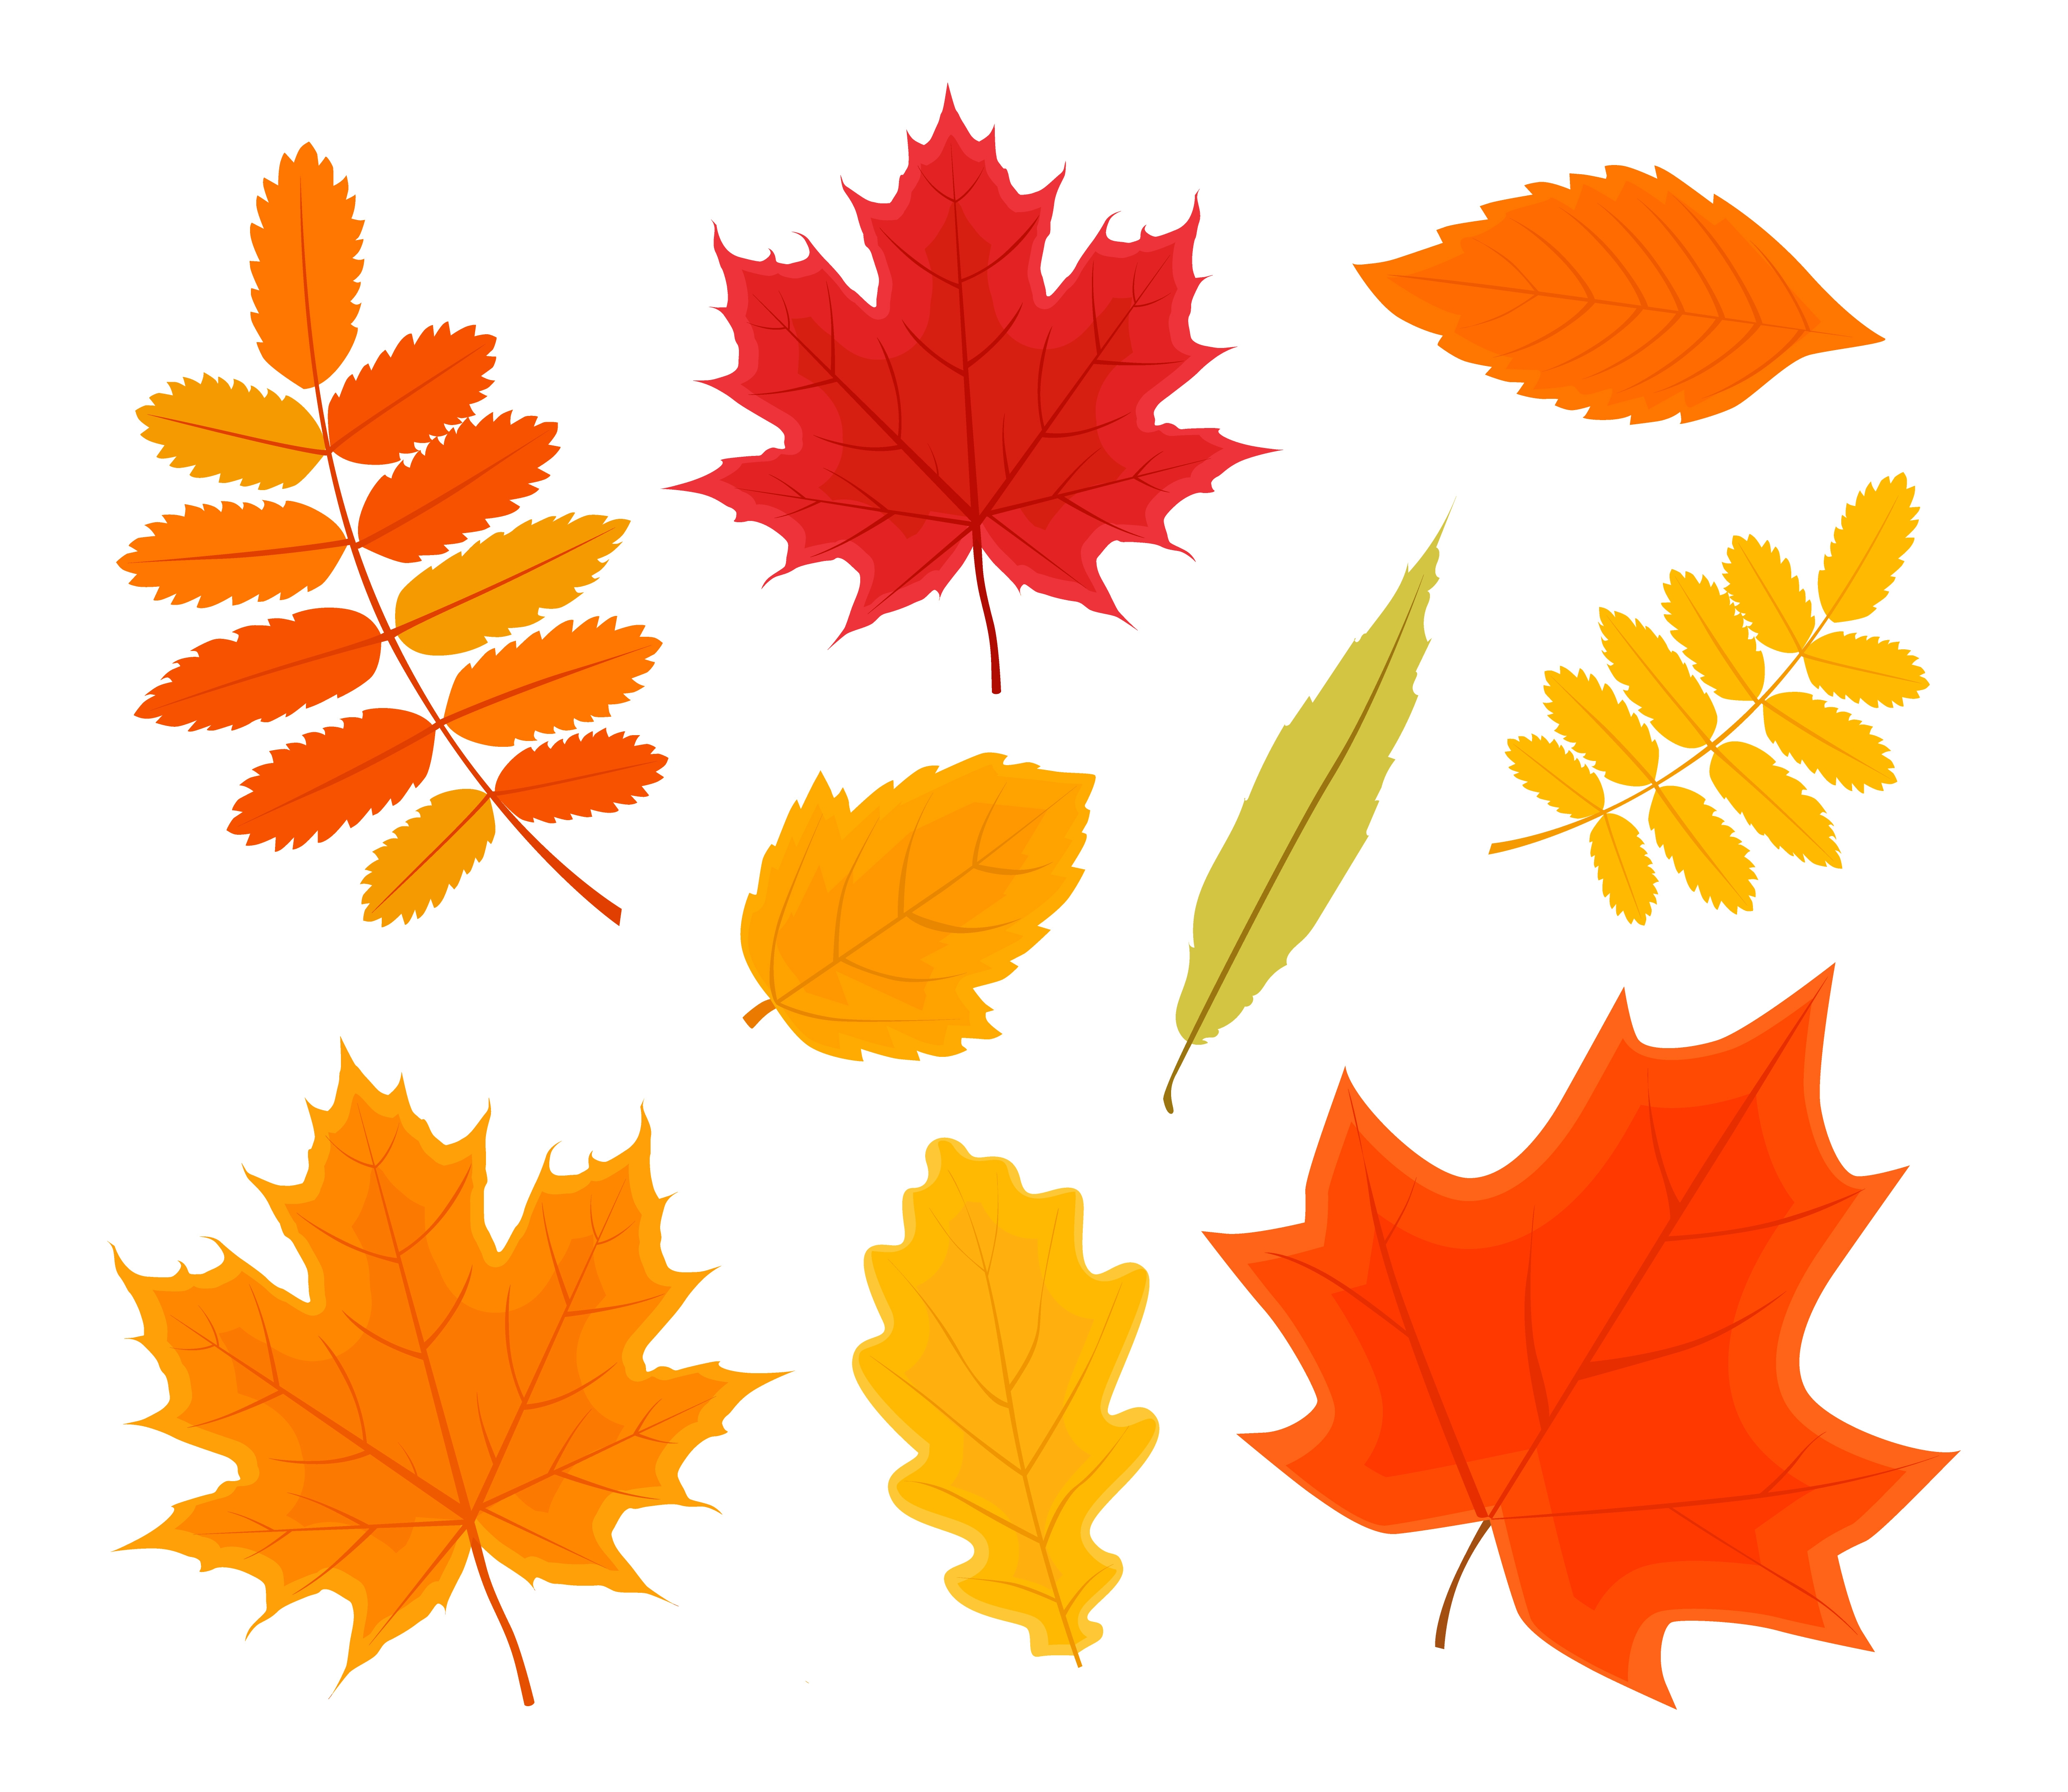 Autumn Forest Leaves Isolated set